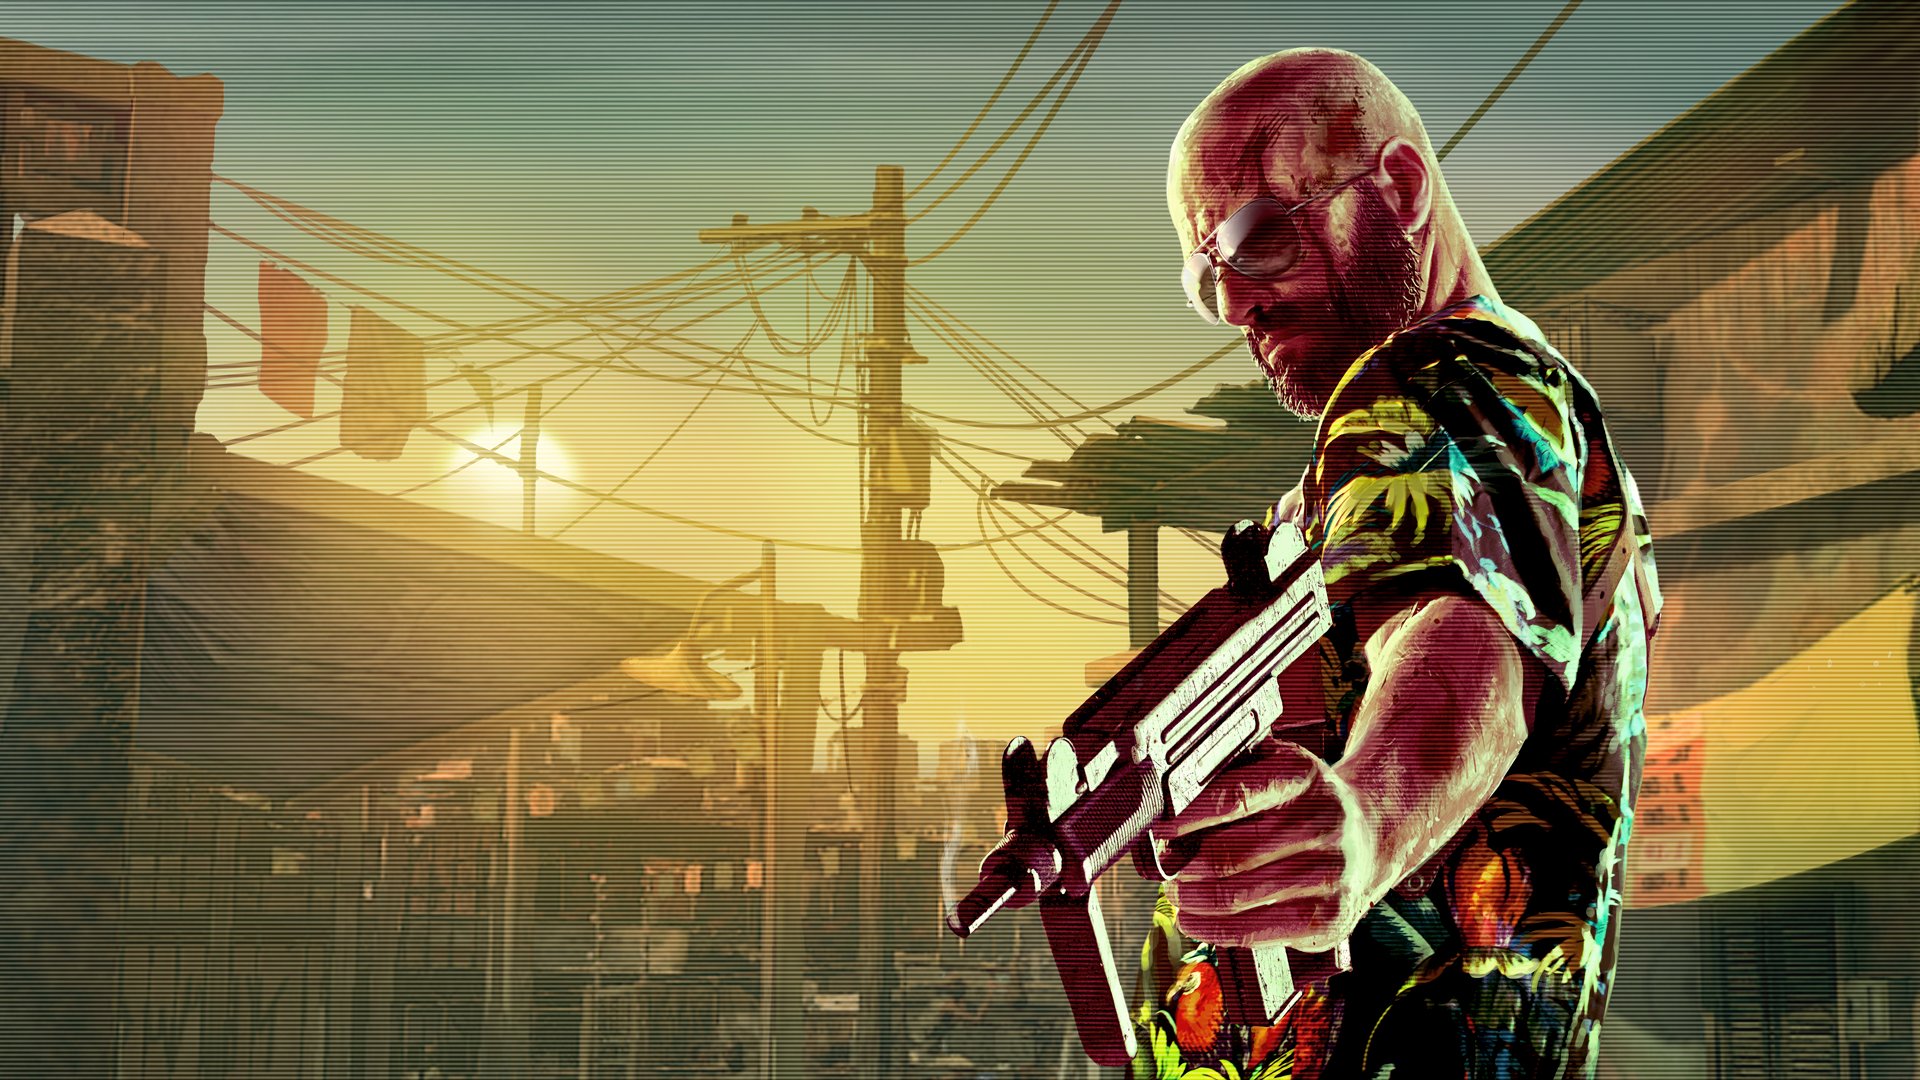 Rockstar will release Max Payne 3 Extended Soundtrack